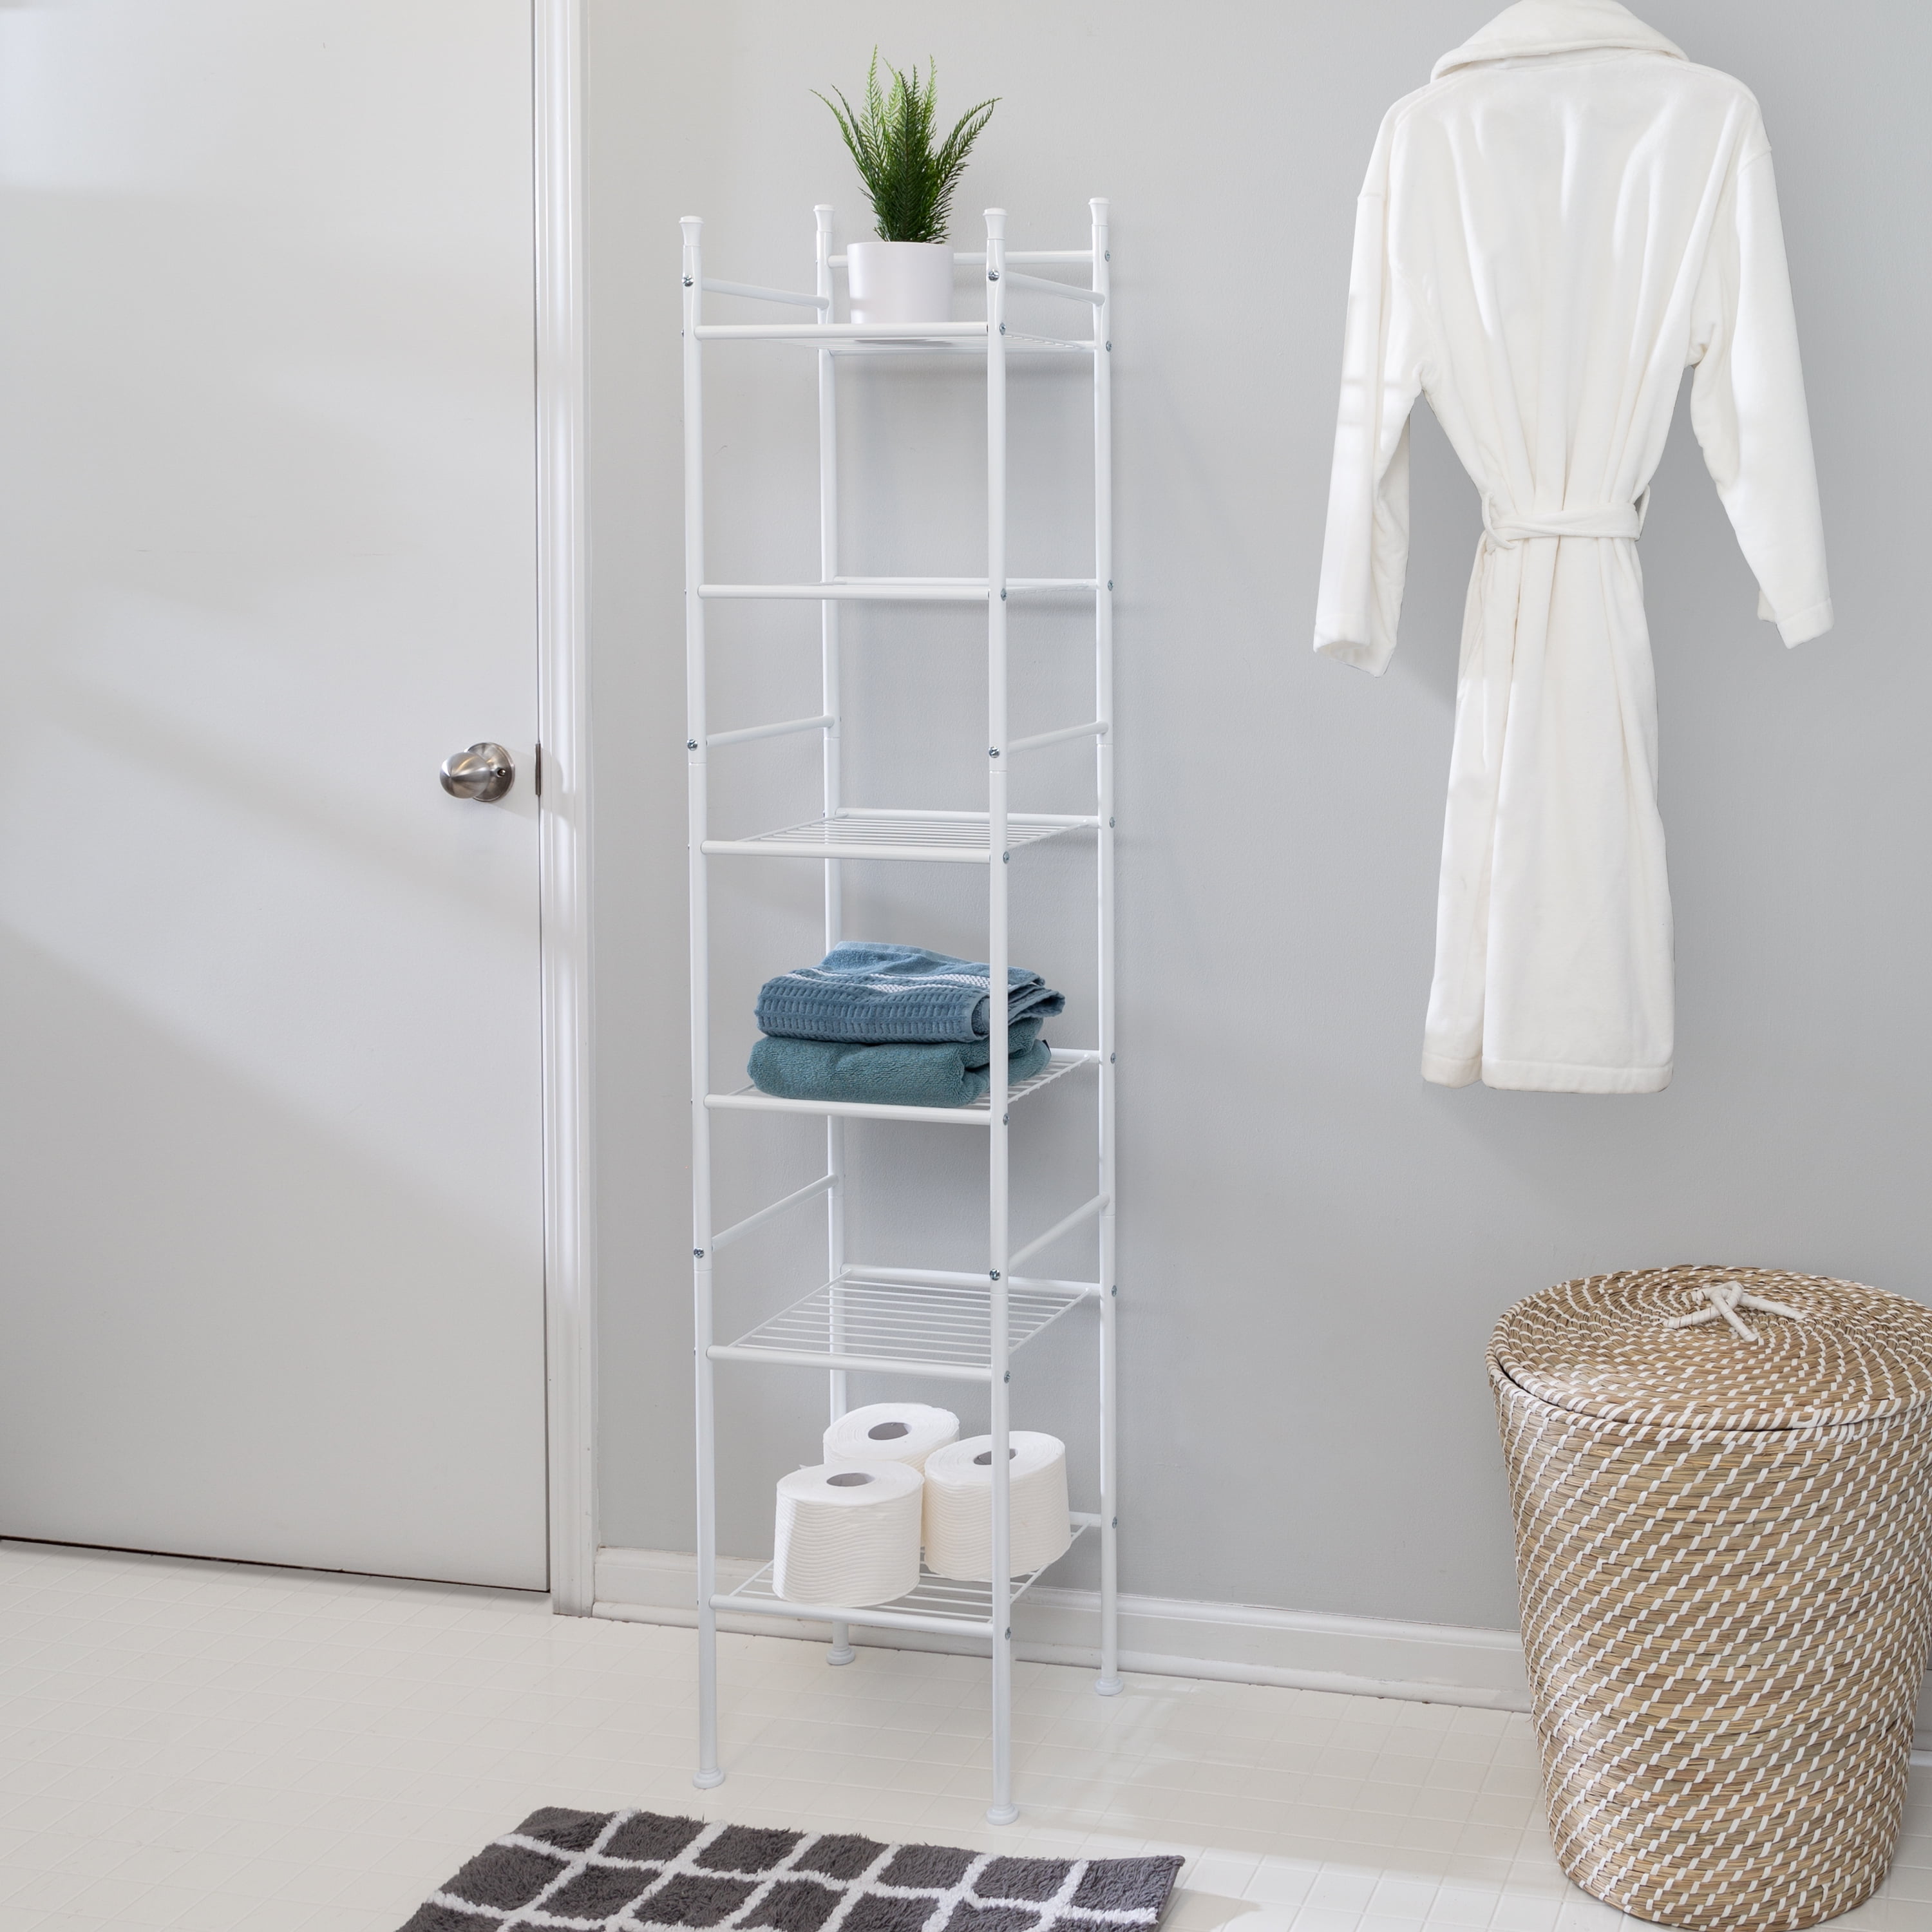 Honey-Can-Do Wall Mounted Bathroom Shelf with Towel Bar and Oval Top Tray, White